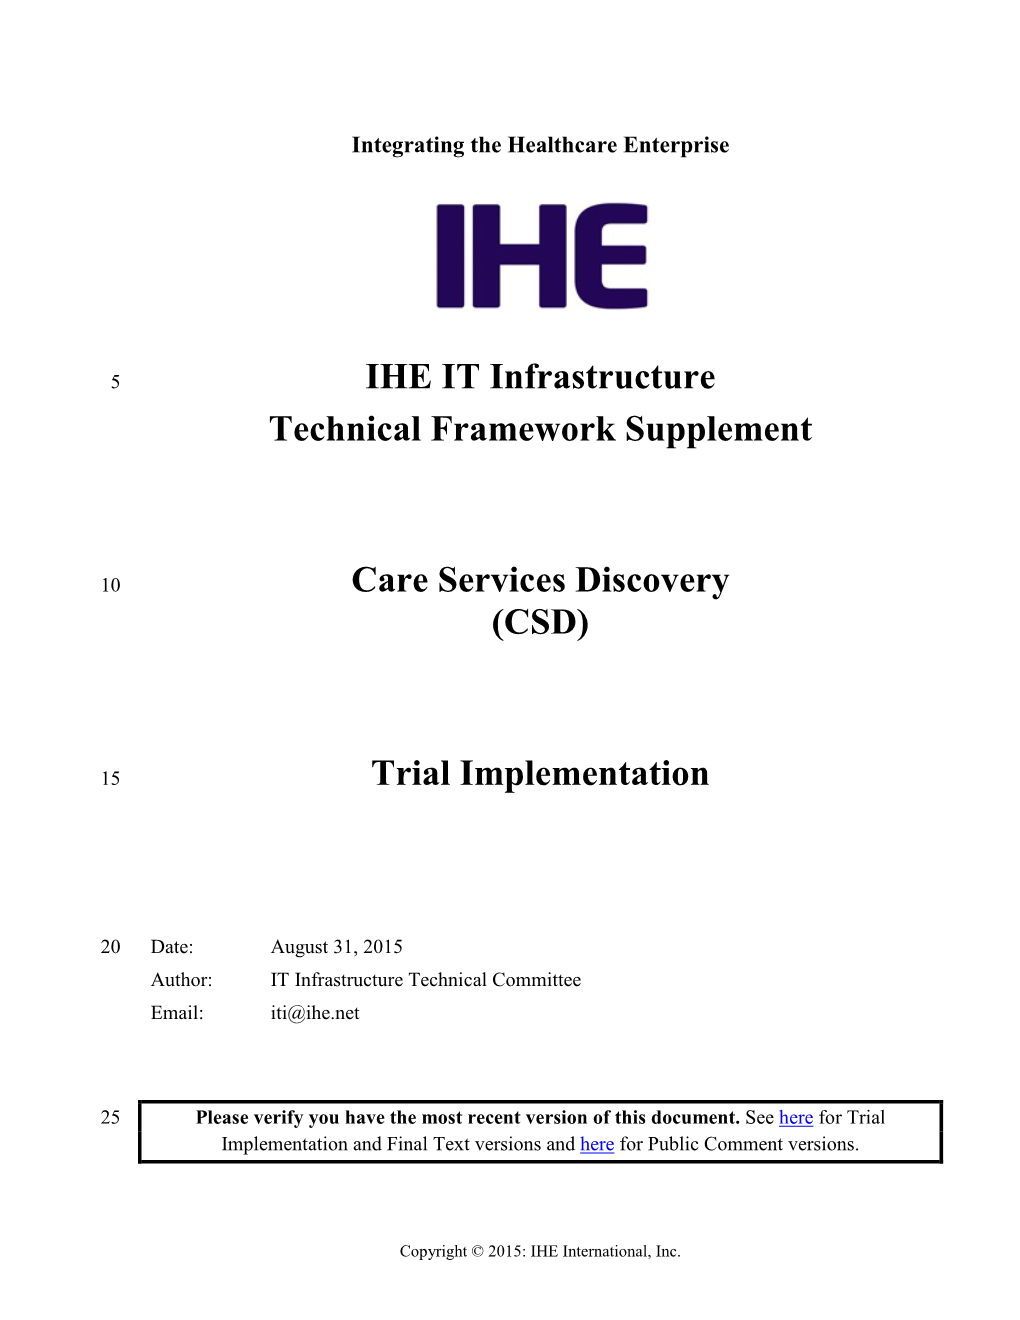 IHE IT Infrastructure Technical Framework Supplement Care